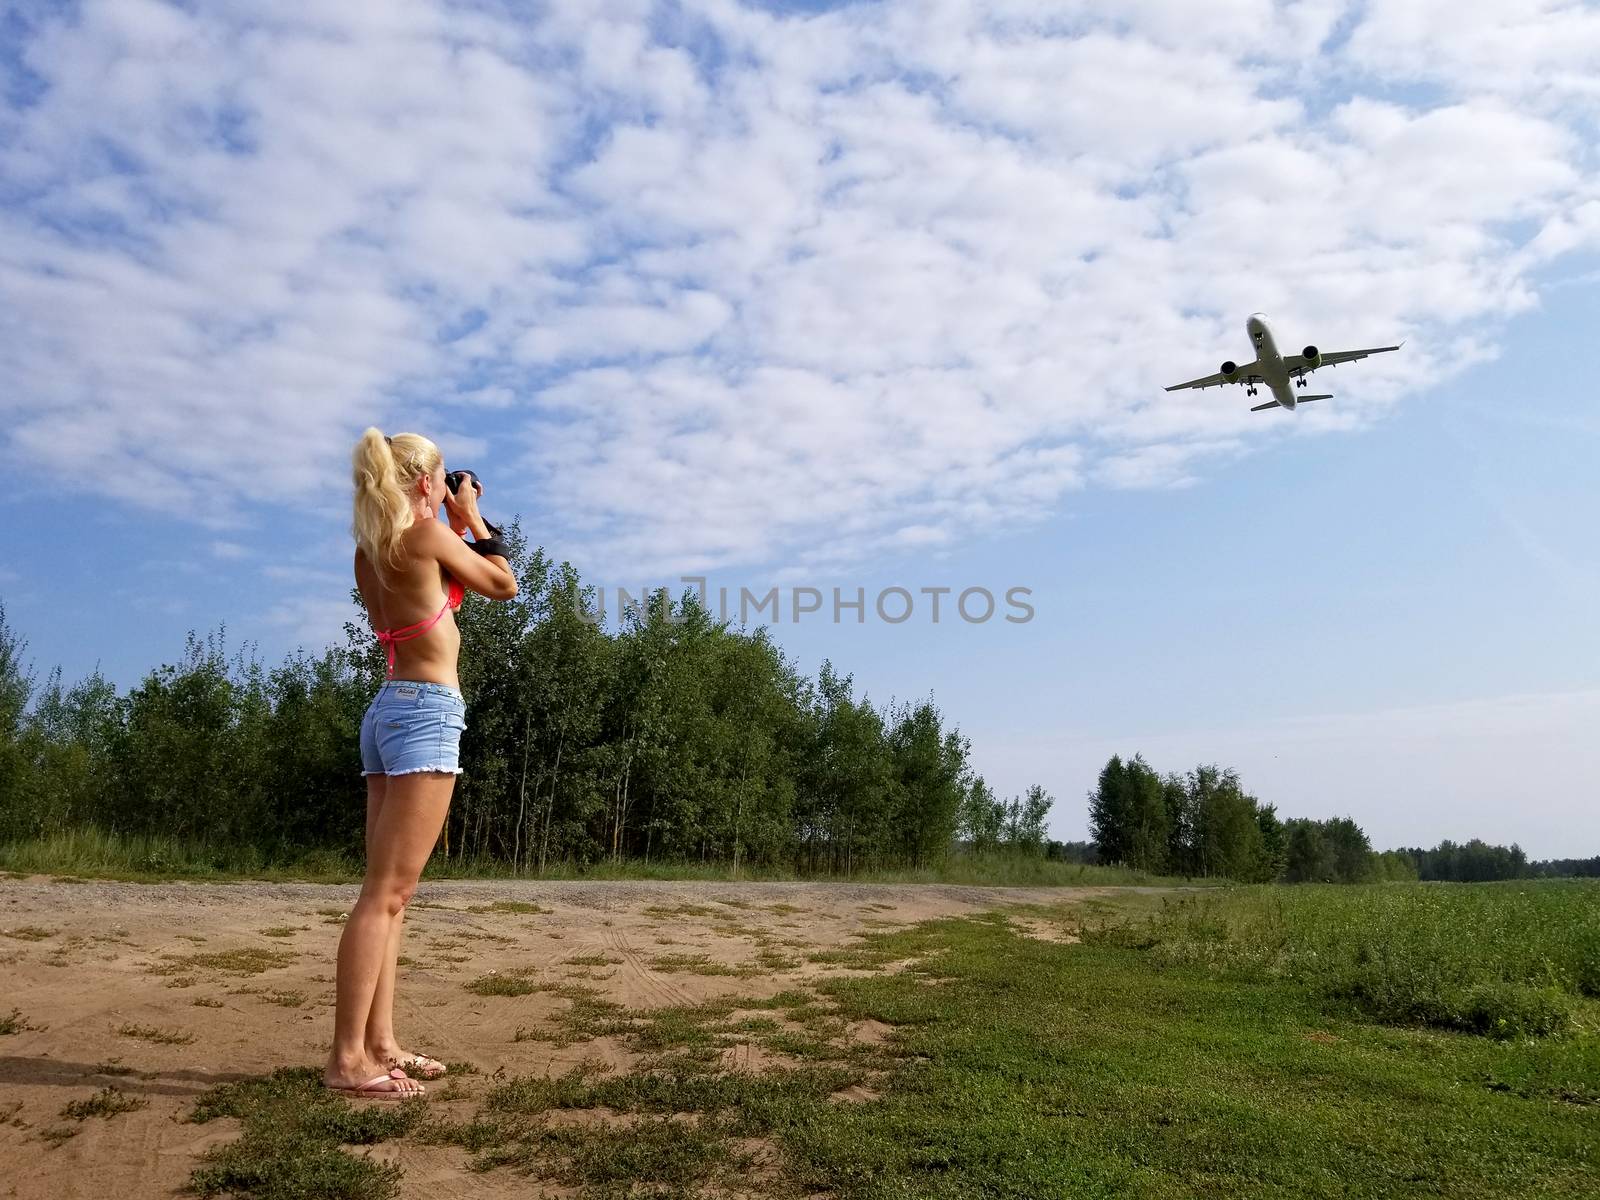 Blonde girl with long hair takes pictures of a plane flying over her on a cloudy sky background by zakob337